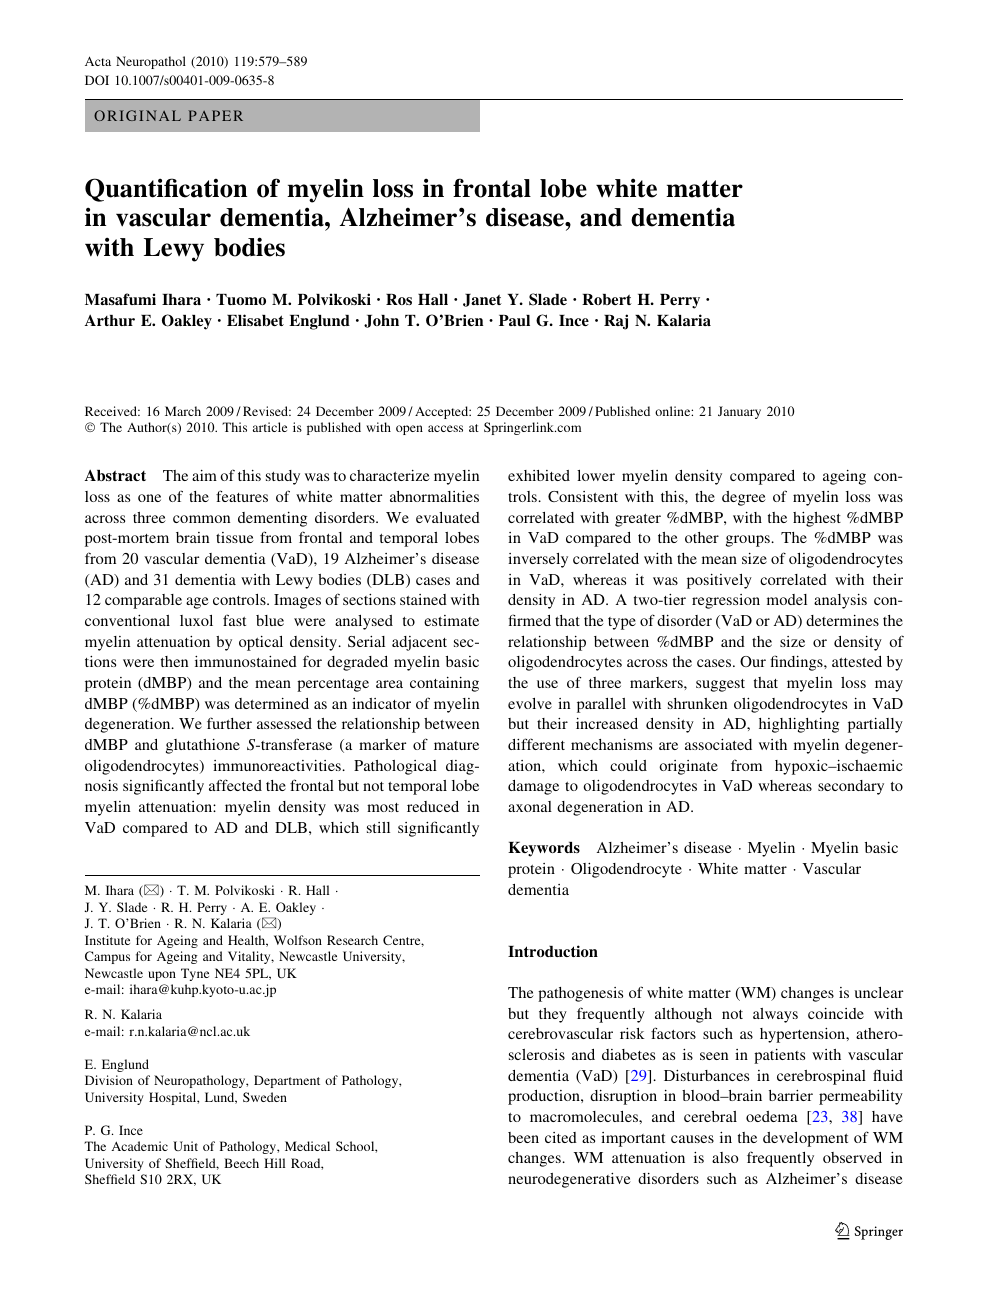 Quantification Of Myelin Loss In Frontal Lobe White Matter In Vascular Dementia Alzheimer S Disease And Dementia With Lewy Bodies Topic Of Research Paper In Clinical Medicine Download Scholarly Article Pdf And